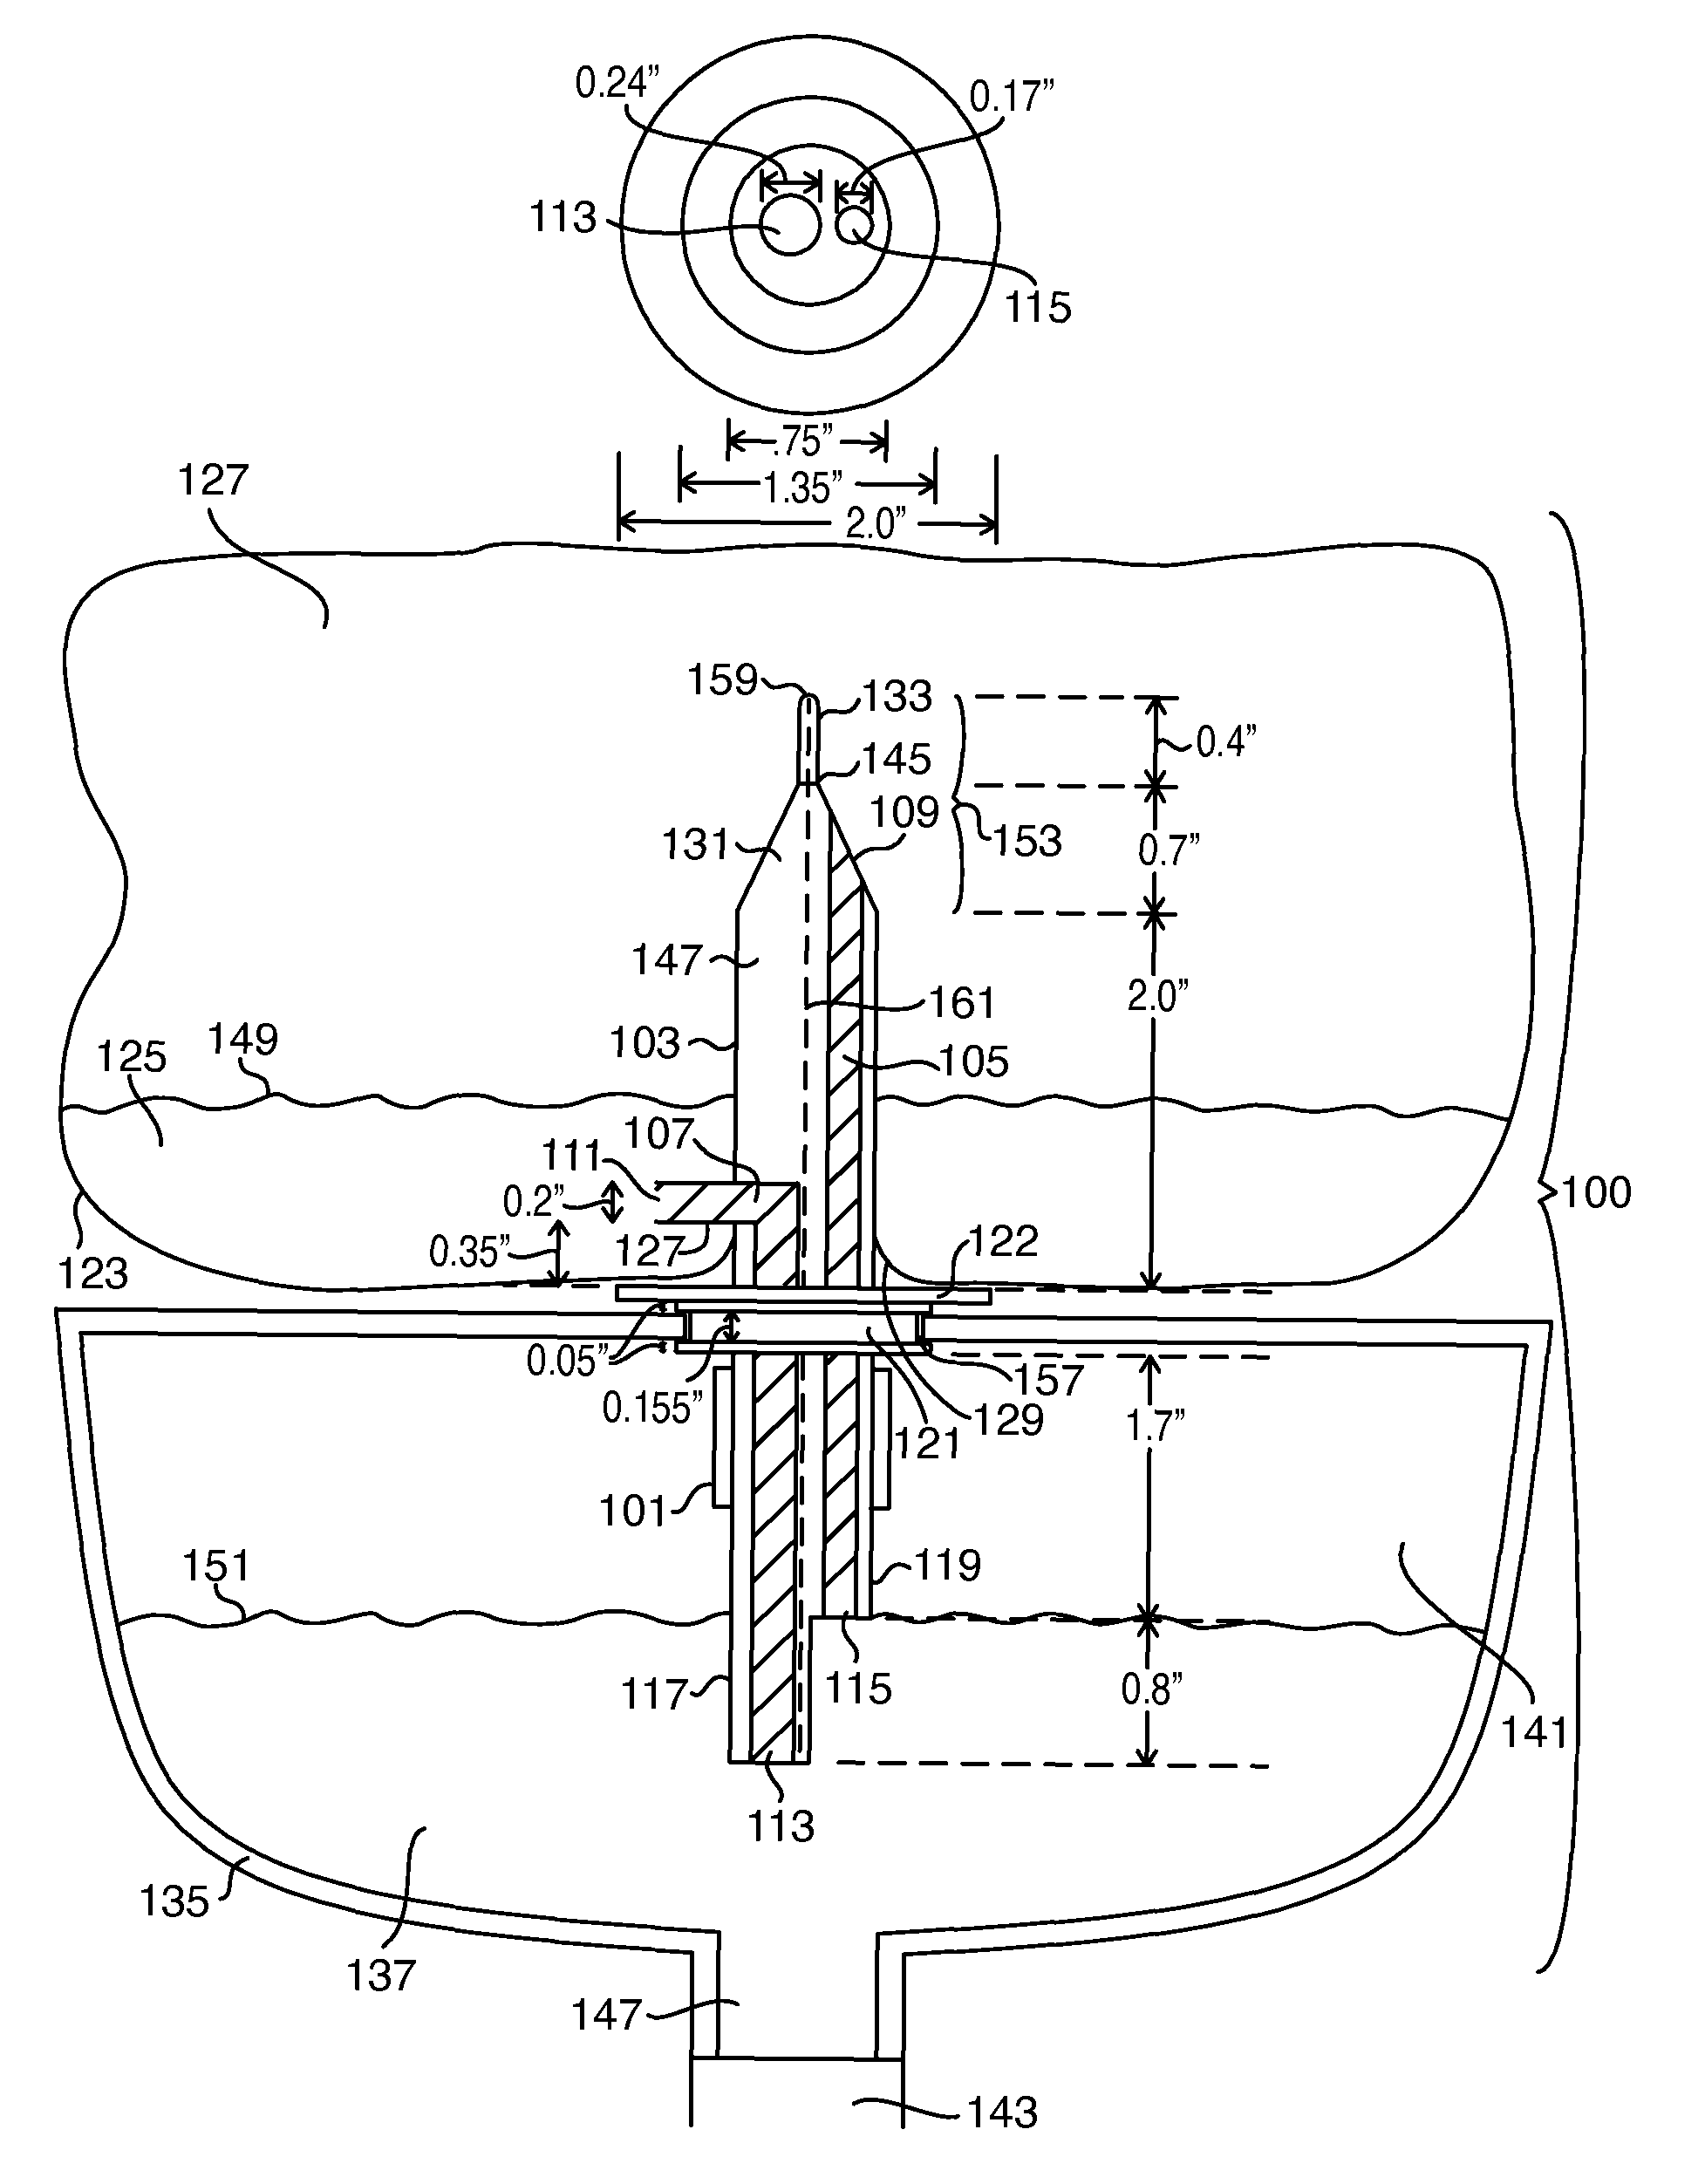 Multiple channel single spike for a liquid dispensing system